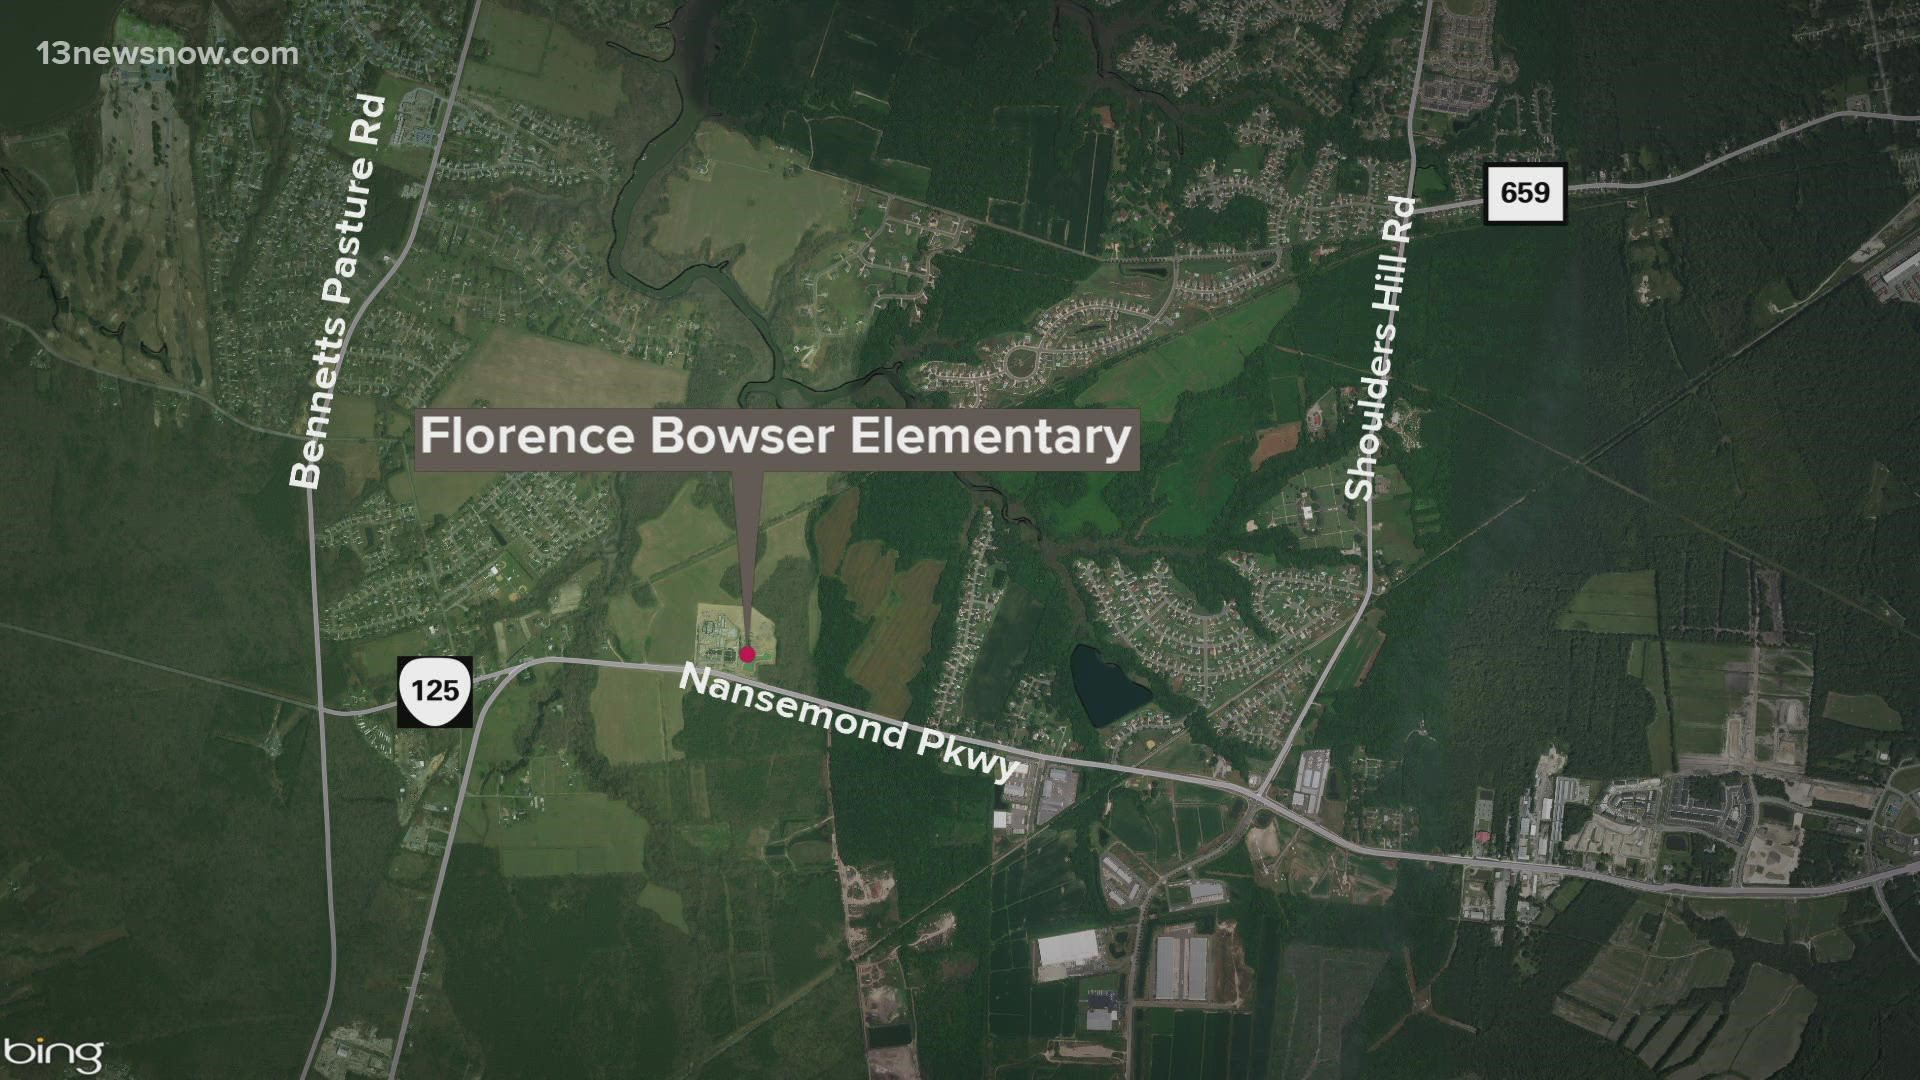 Suffolk firefighters got a call about a fire in a trashcan in a girls' bathroom at Florence Bowser Elementary School.